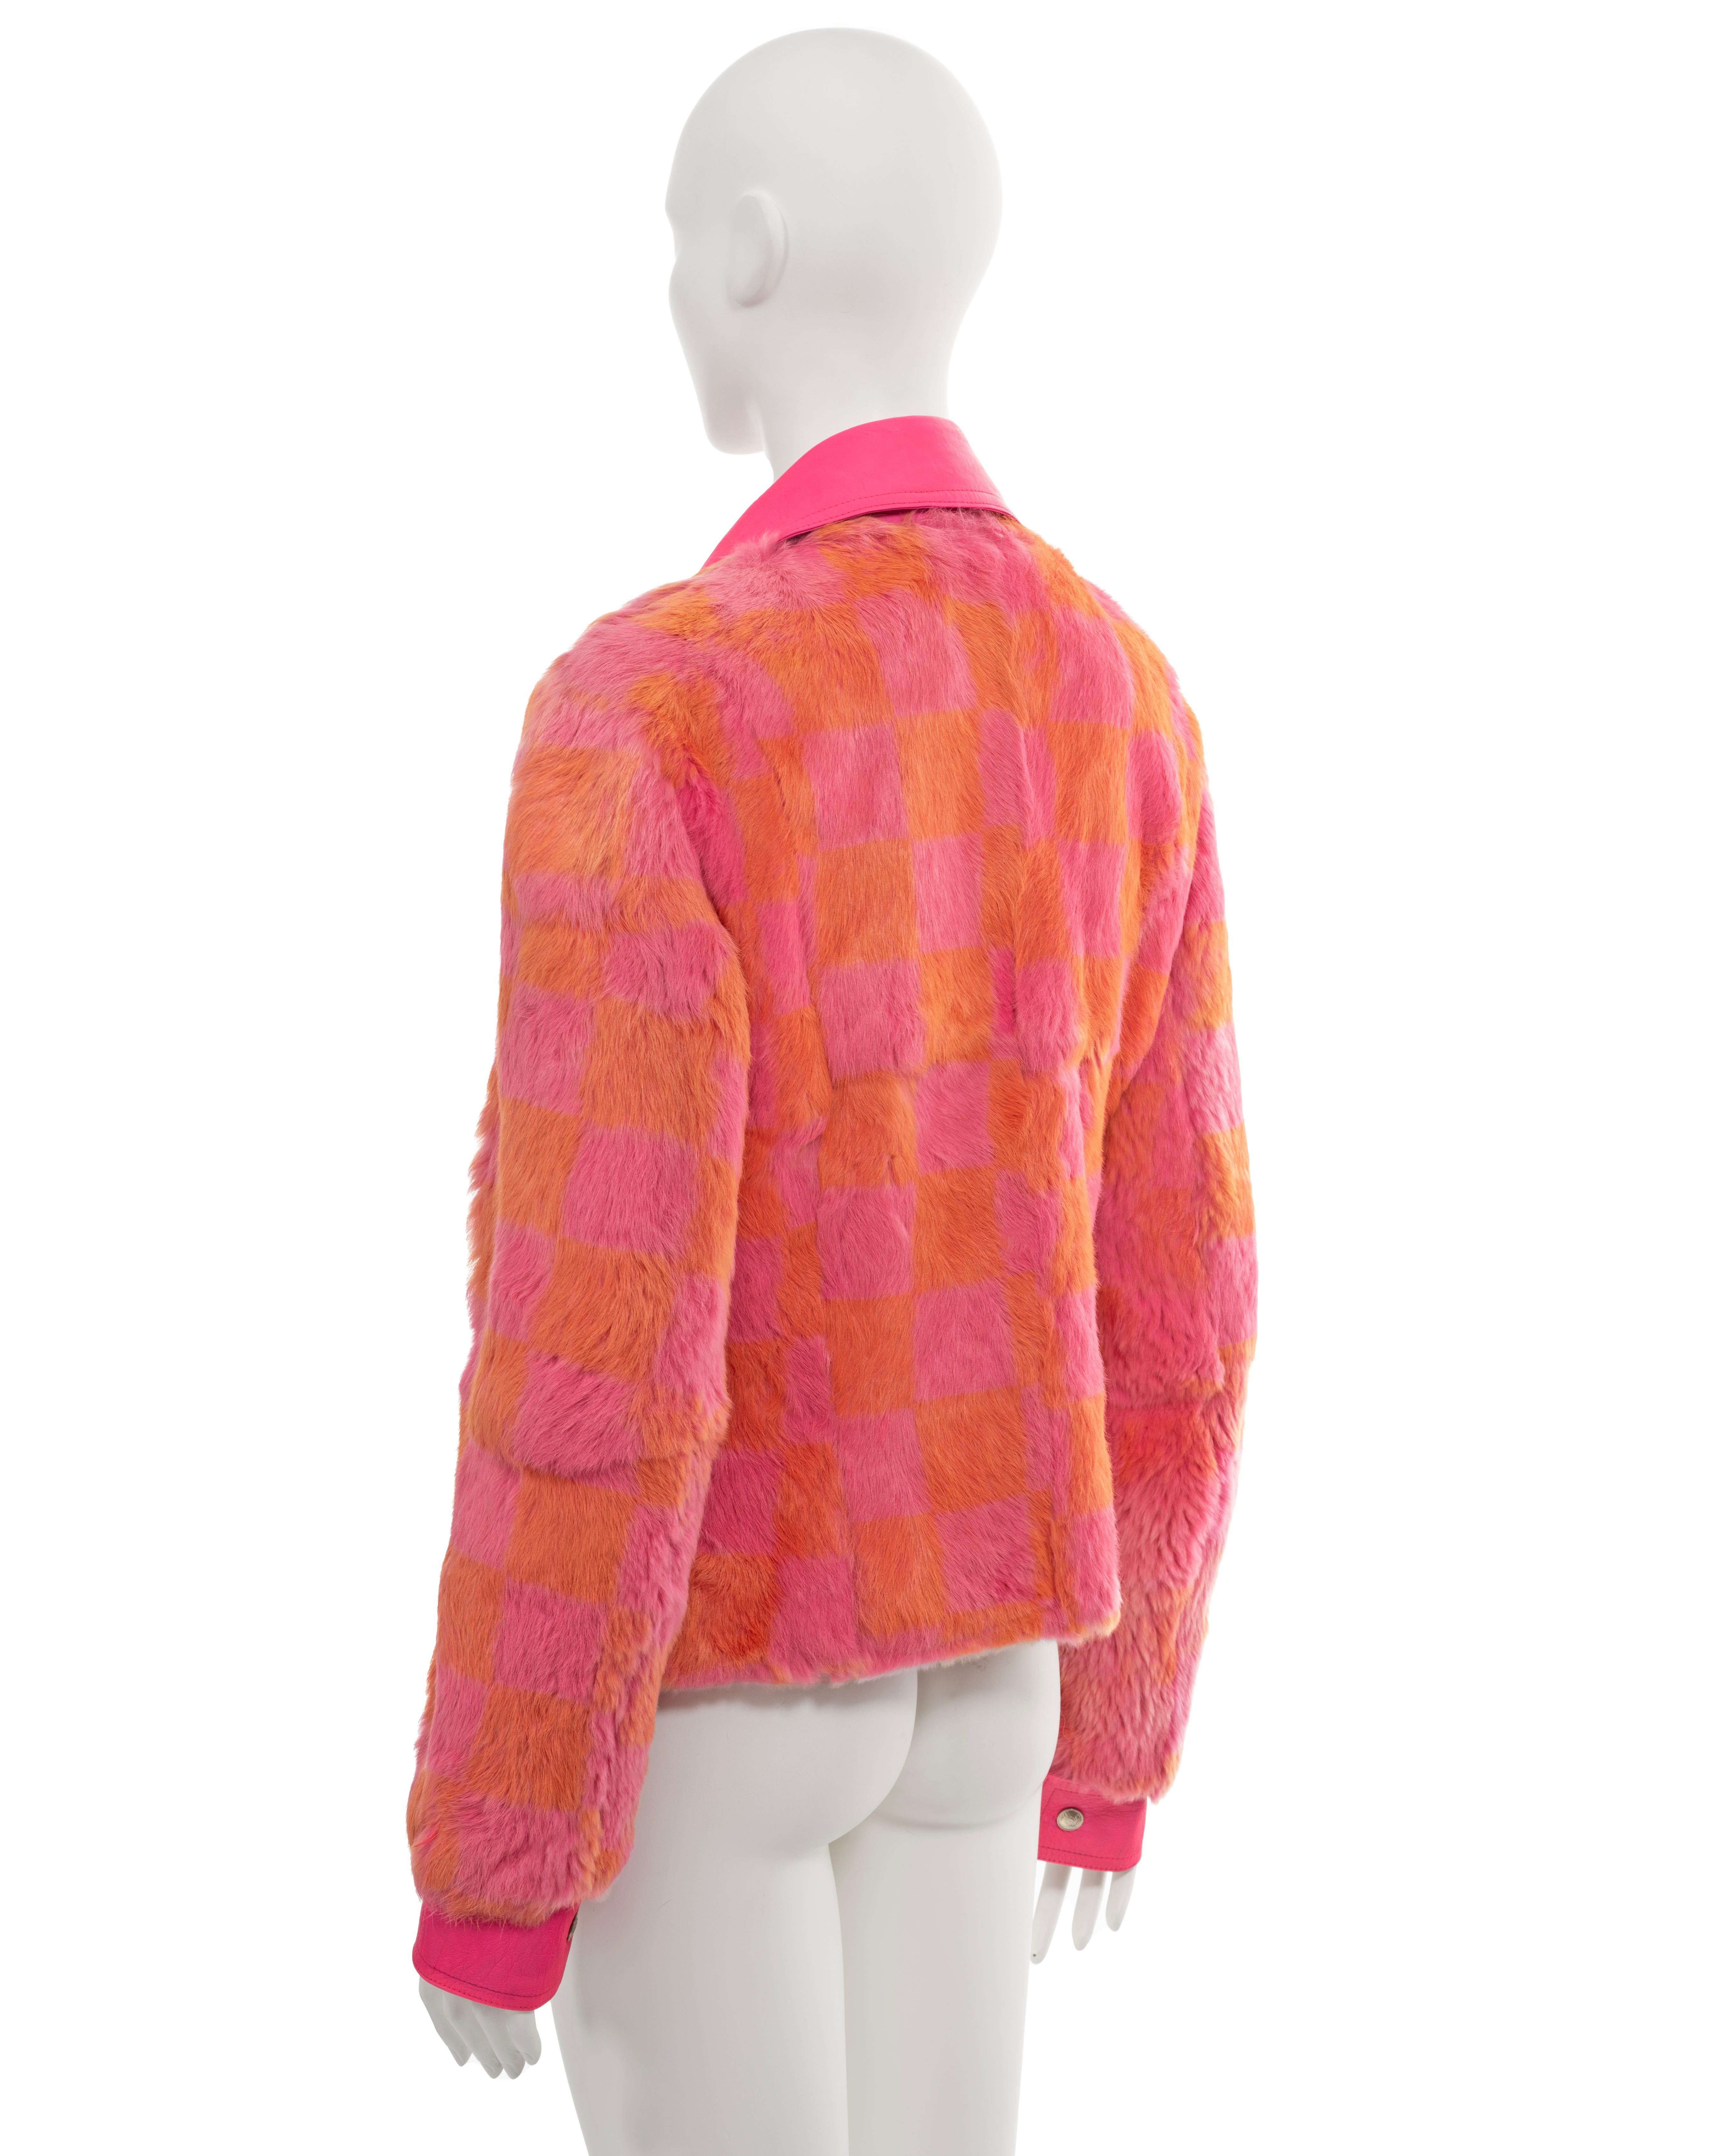 Christian Dior by John Galliano pink and orange fur shirt jacket, fw 2001 For Sale 2